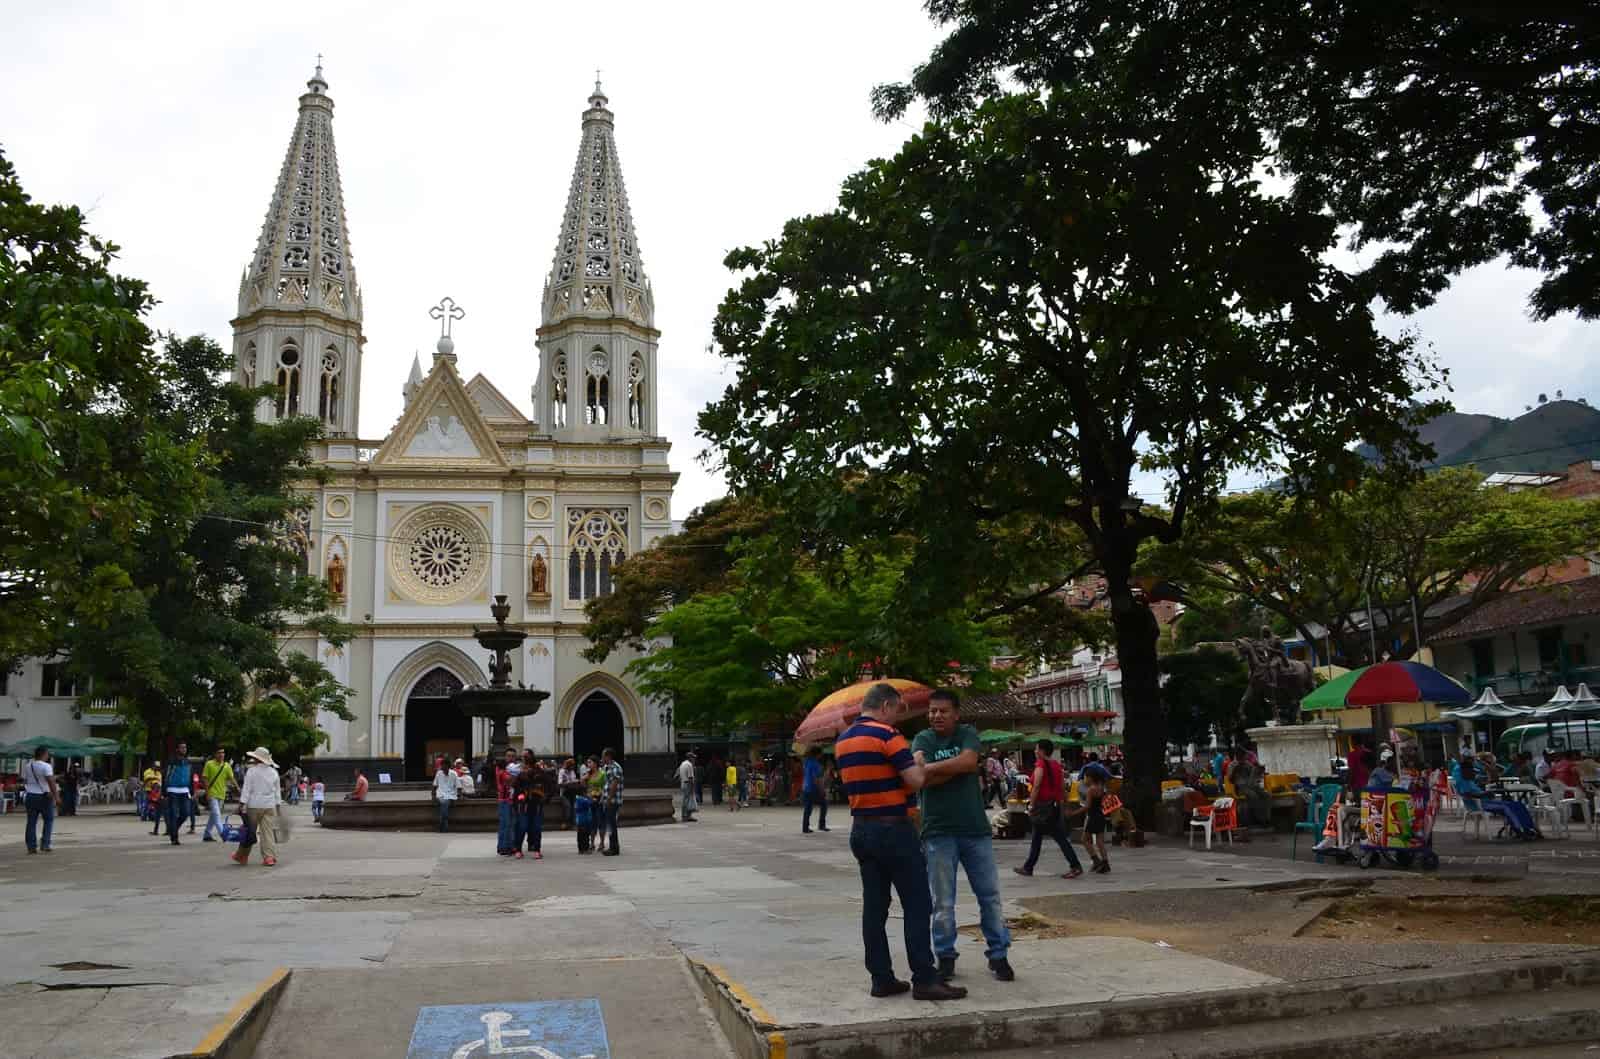 Plaza in Andes, Antioquia, Colombia